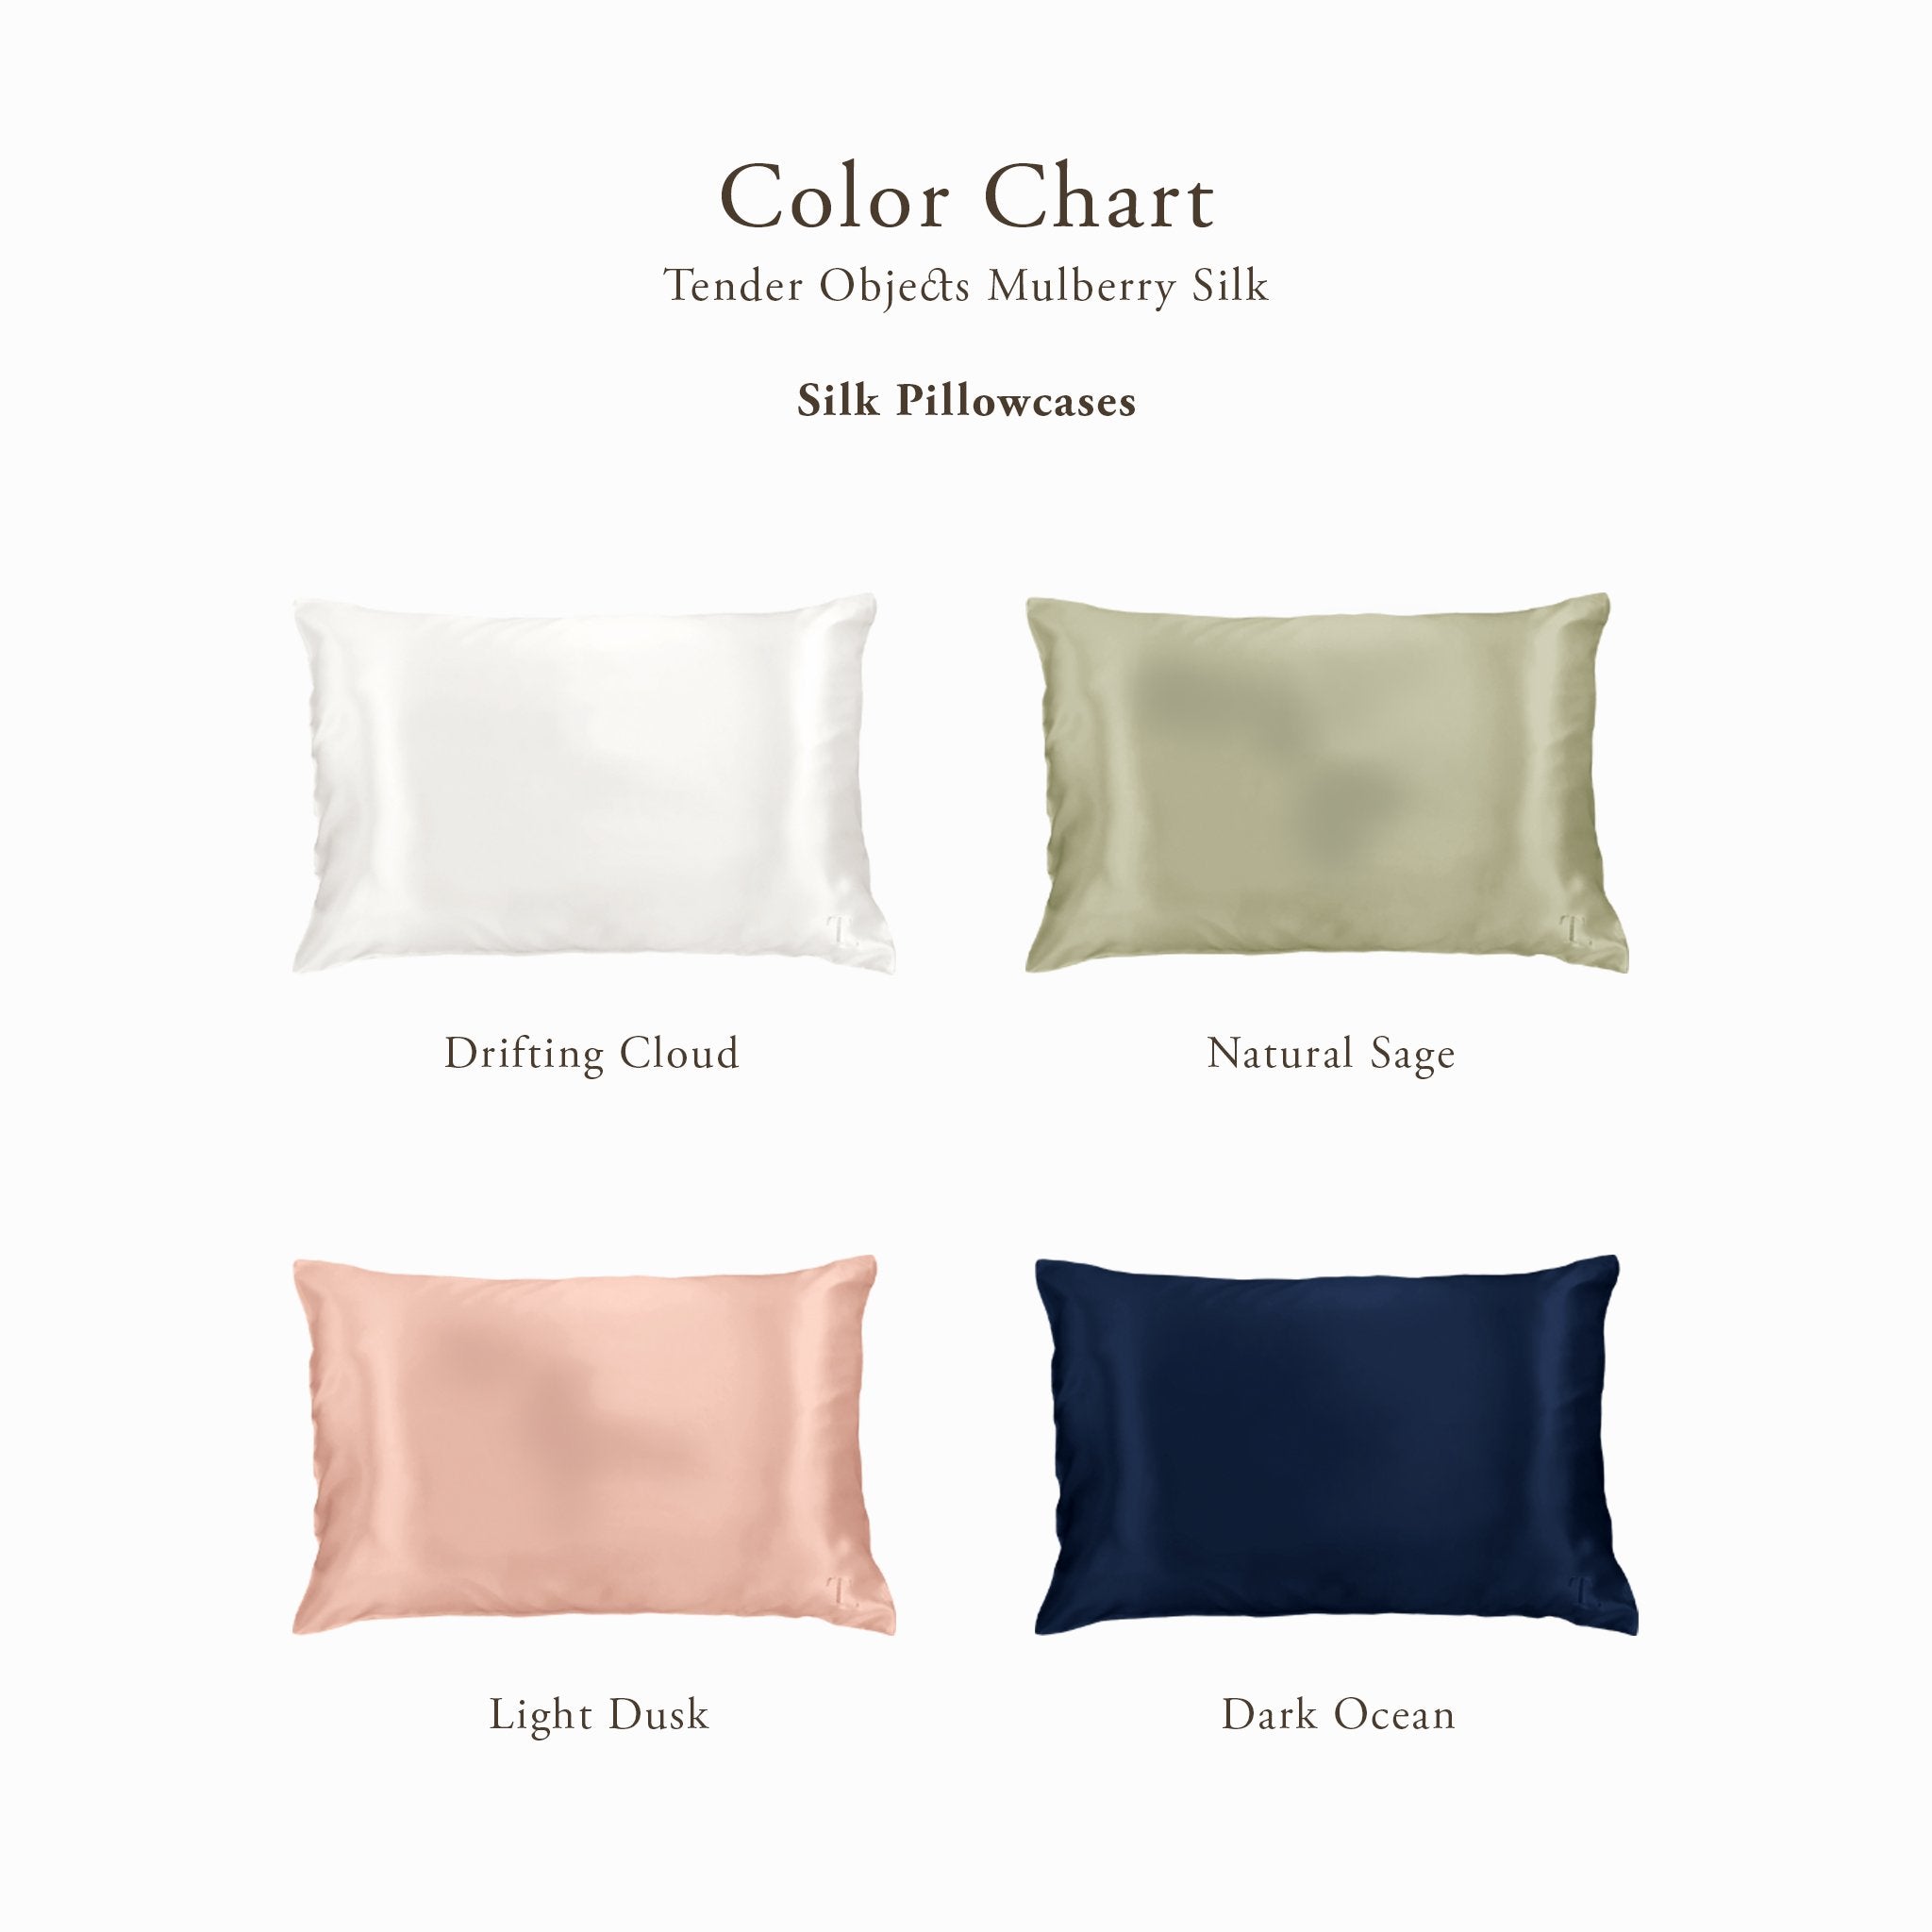 Tender Objects Silk Pillowcase colors